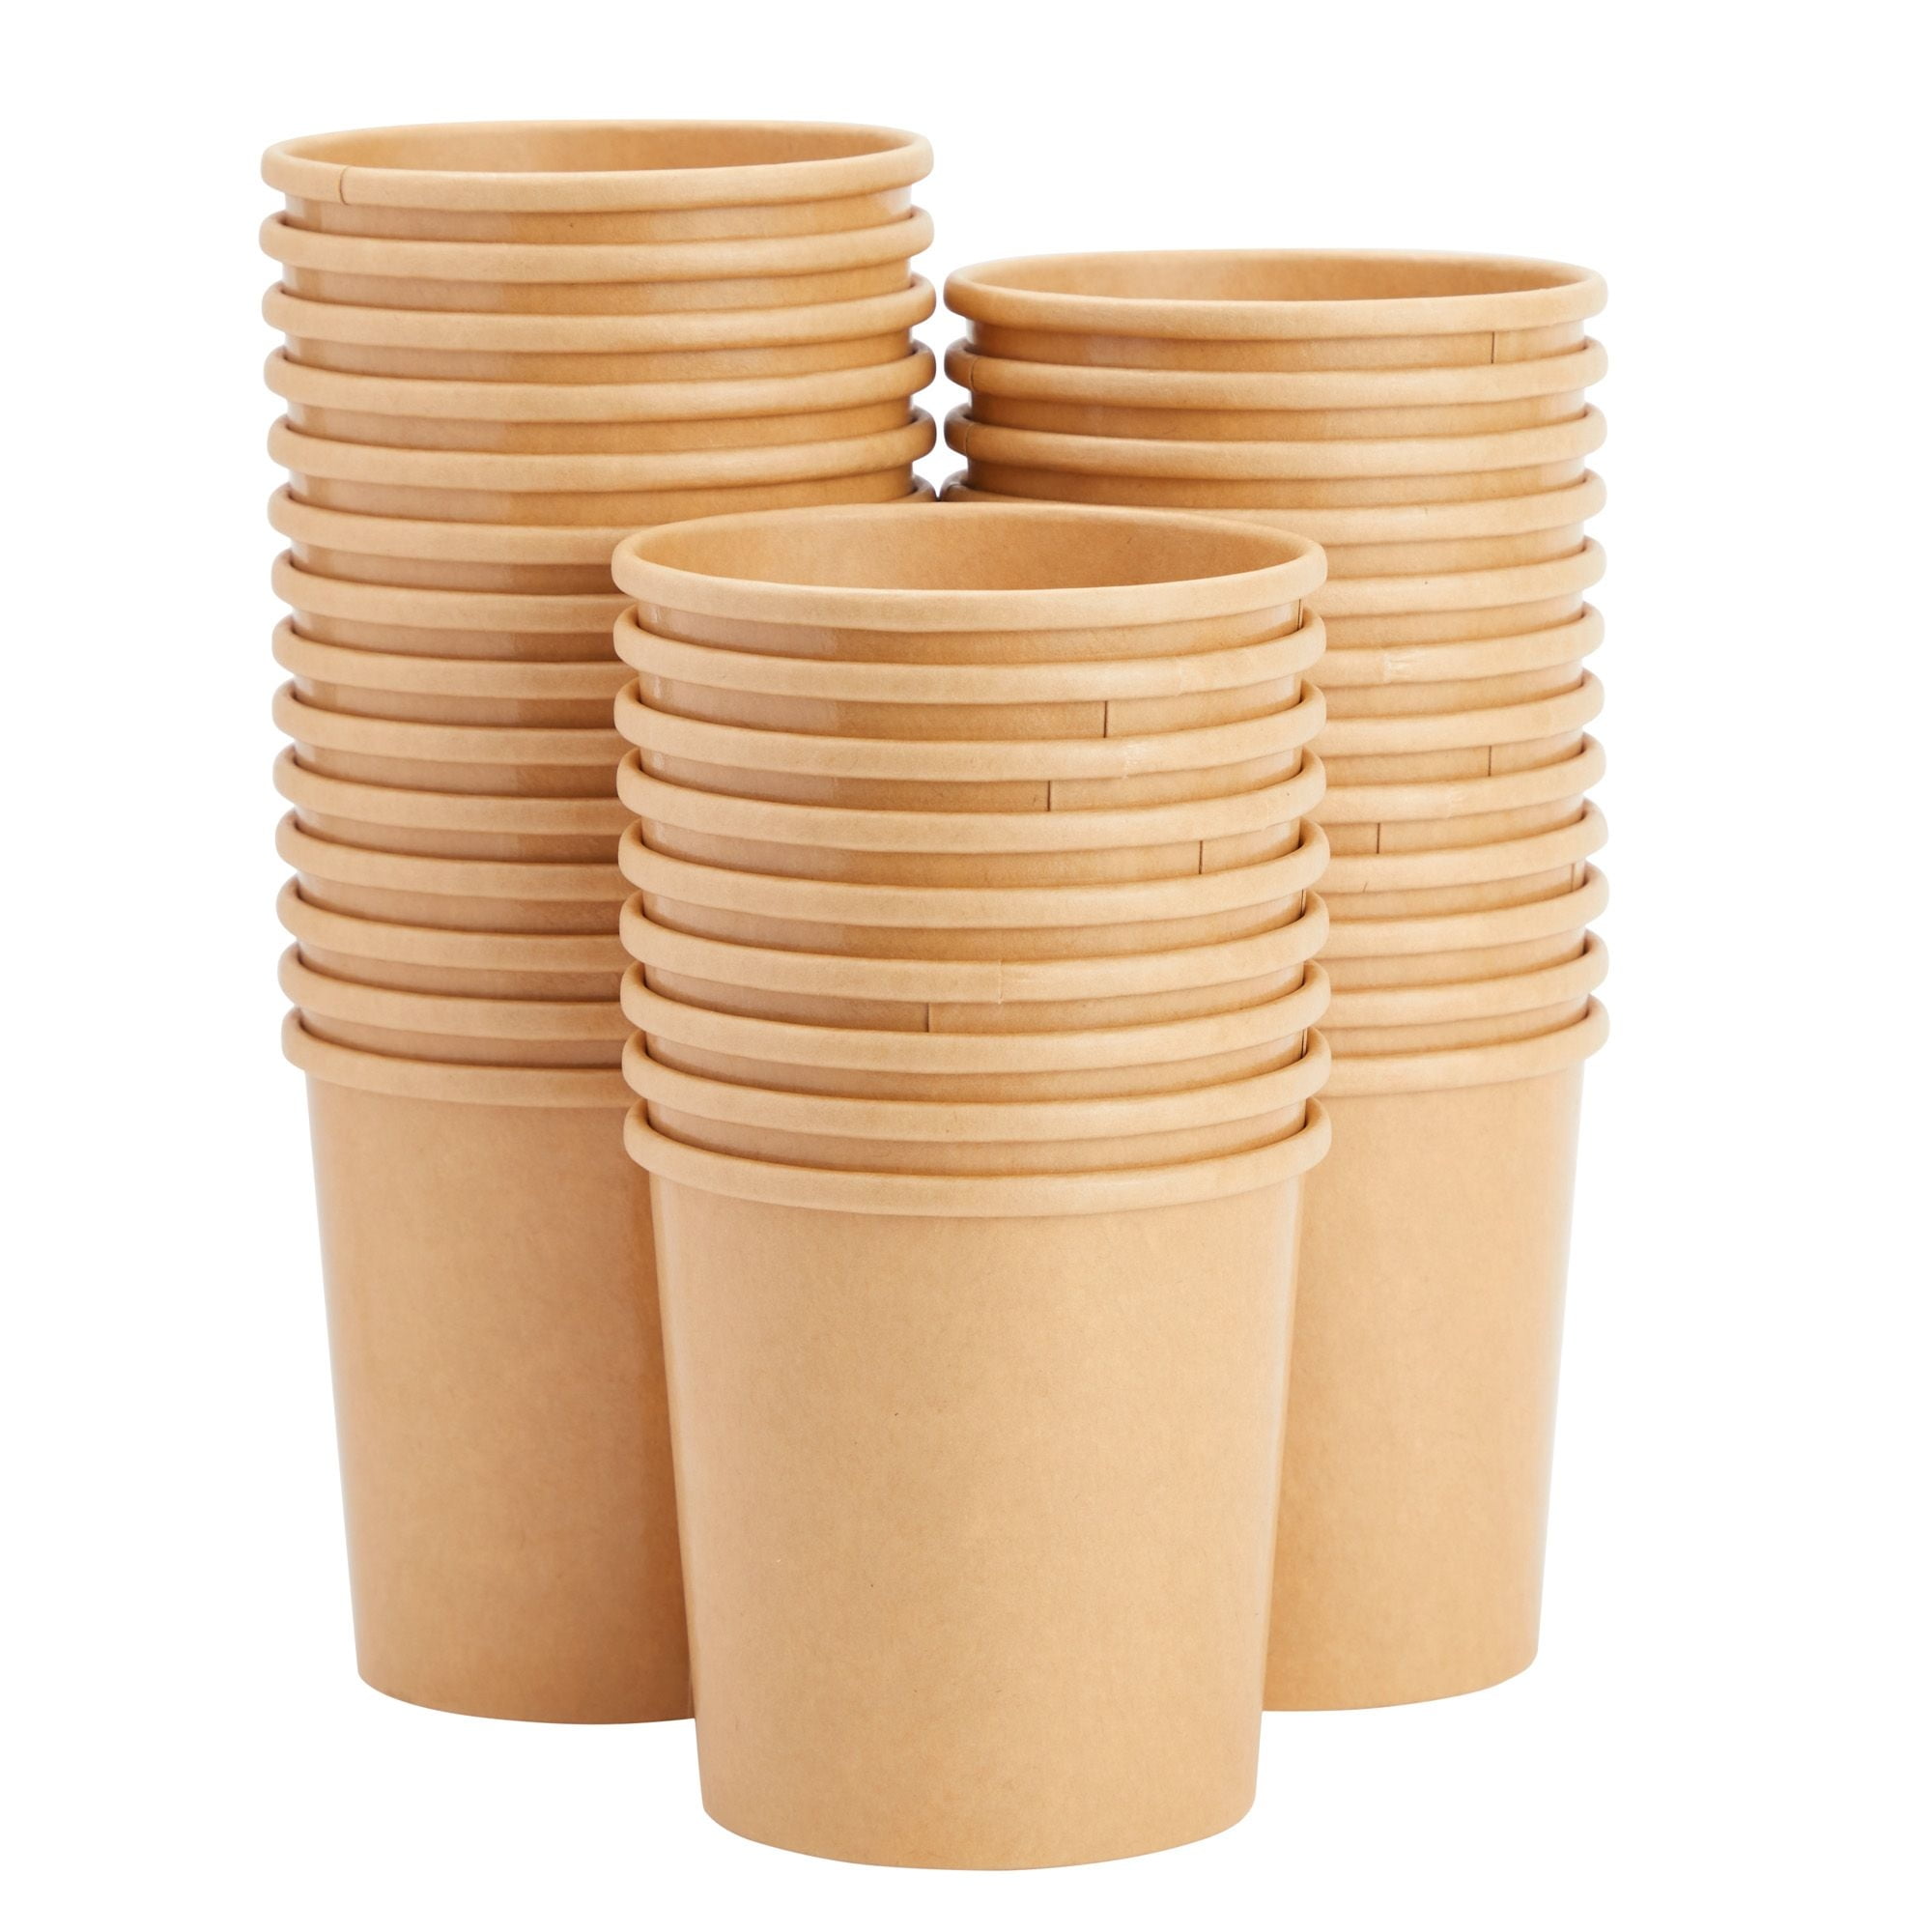 Yocup 16 oz Kraft / Natural Brown Paper Ice Cream Container with Paper Lid  Combo - 1 case (250 set)